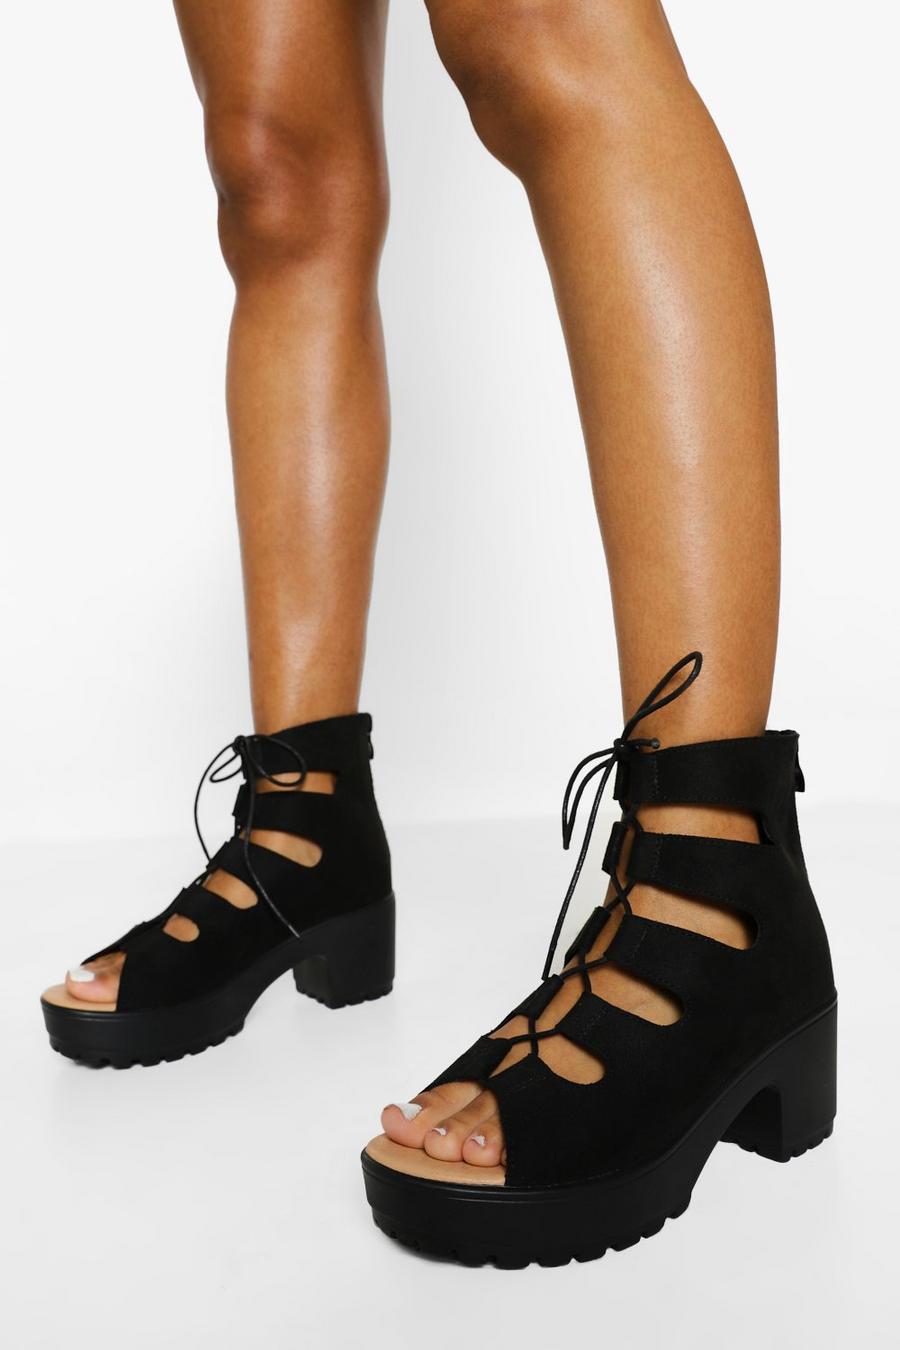 Black noir Cleated Peep Toe Lace Up Sandals